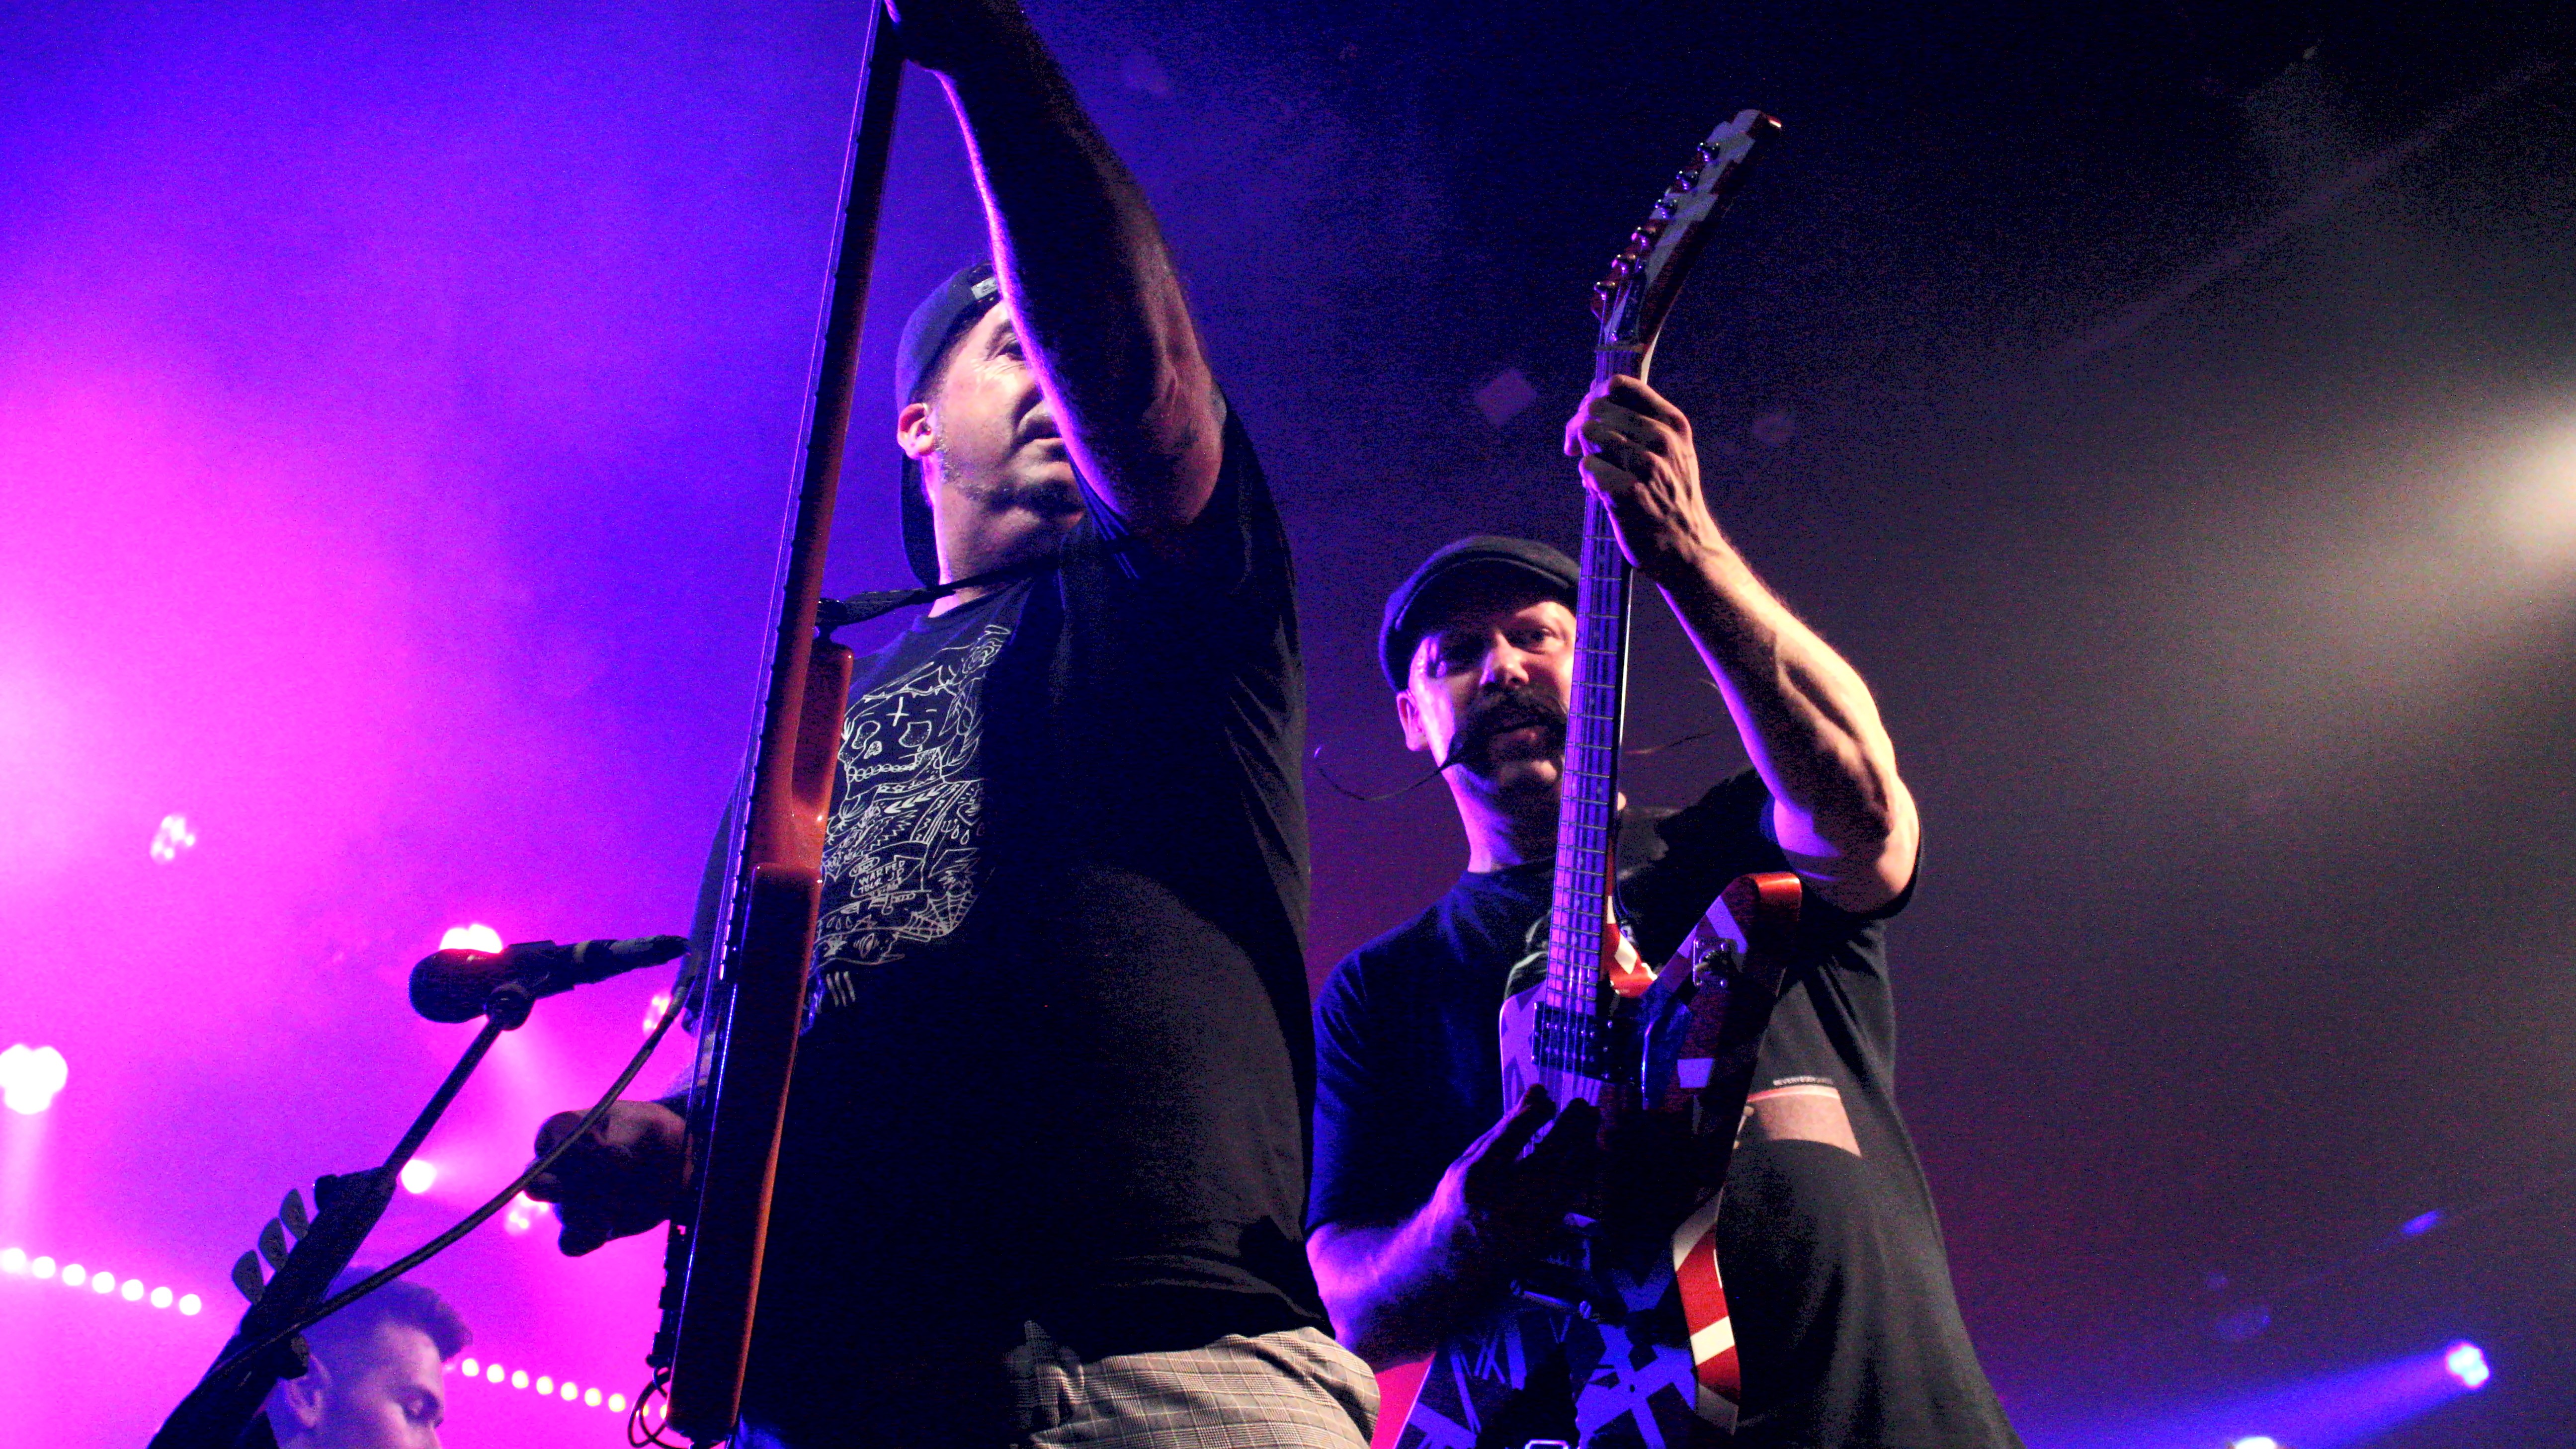 You are currently viewing We wanna party party – Zebrahead in Köln